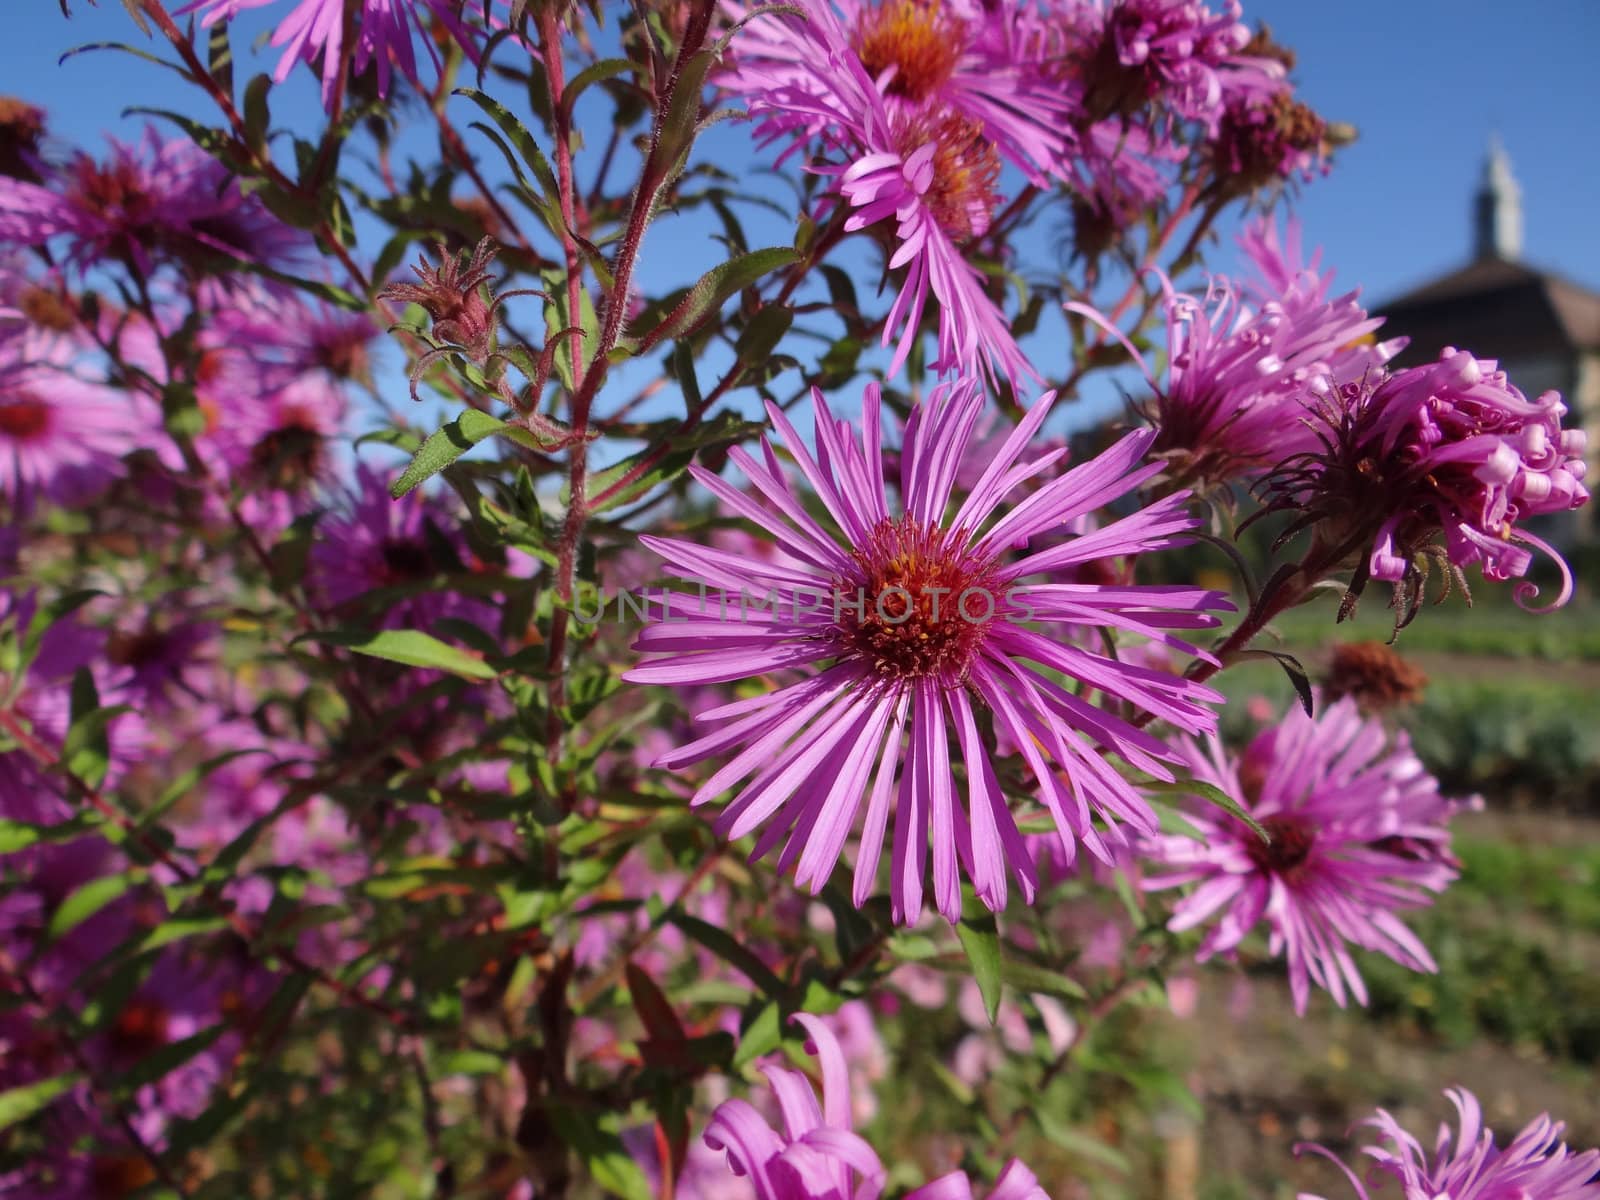 Asters in autumn by Mbatelier